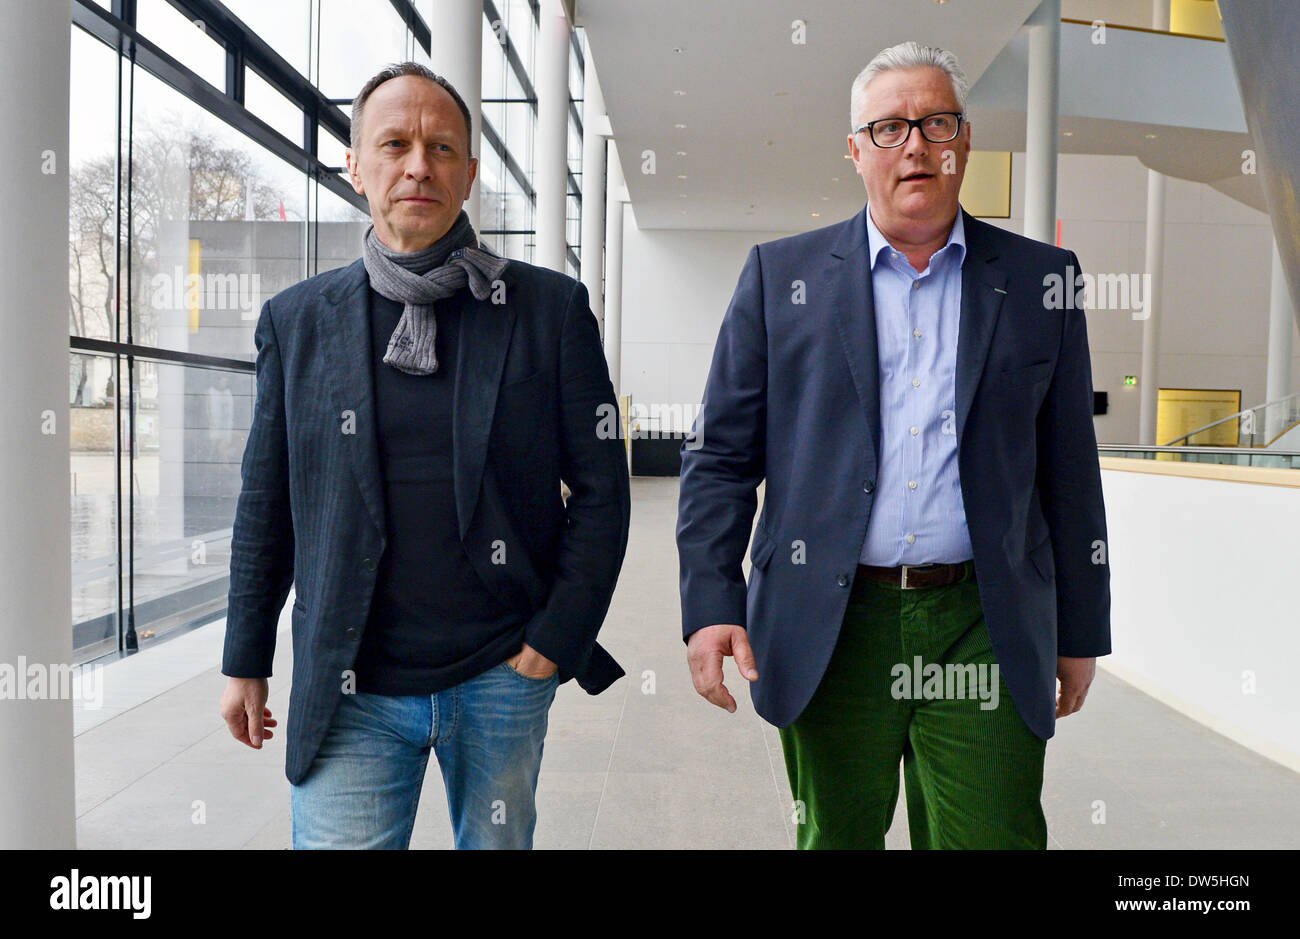 Erfurt, Germany. 28th Feb, 2014. Hasko Weber (L-R), director of the German National Theater Weiman and Swiss Direcot of Theater Erfurt Guy Montavon stand next to each other in Erfurt, Germany, 28 February 2014. They discuss future collaborations between Theater Erfurt and the German National Theater Weimar during a press confernce. Photo: MARTIN SCHUTT/dpa/Alamy Live News Stock Photo